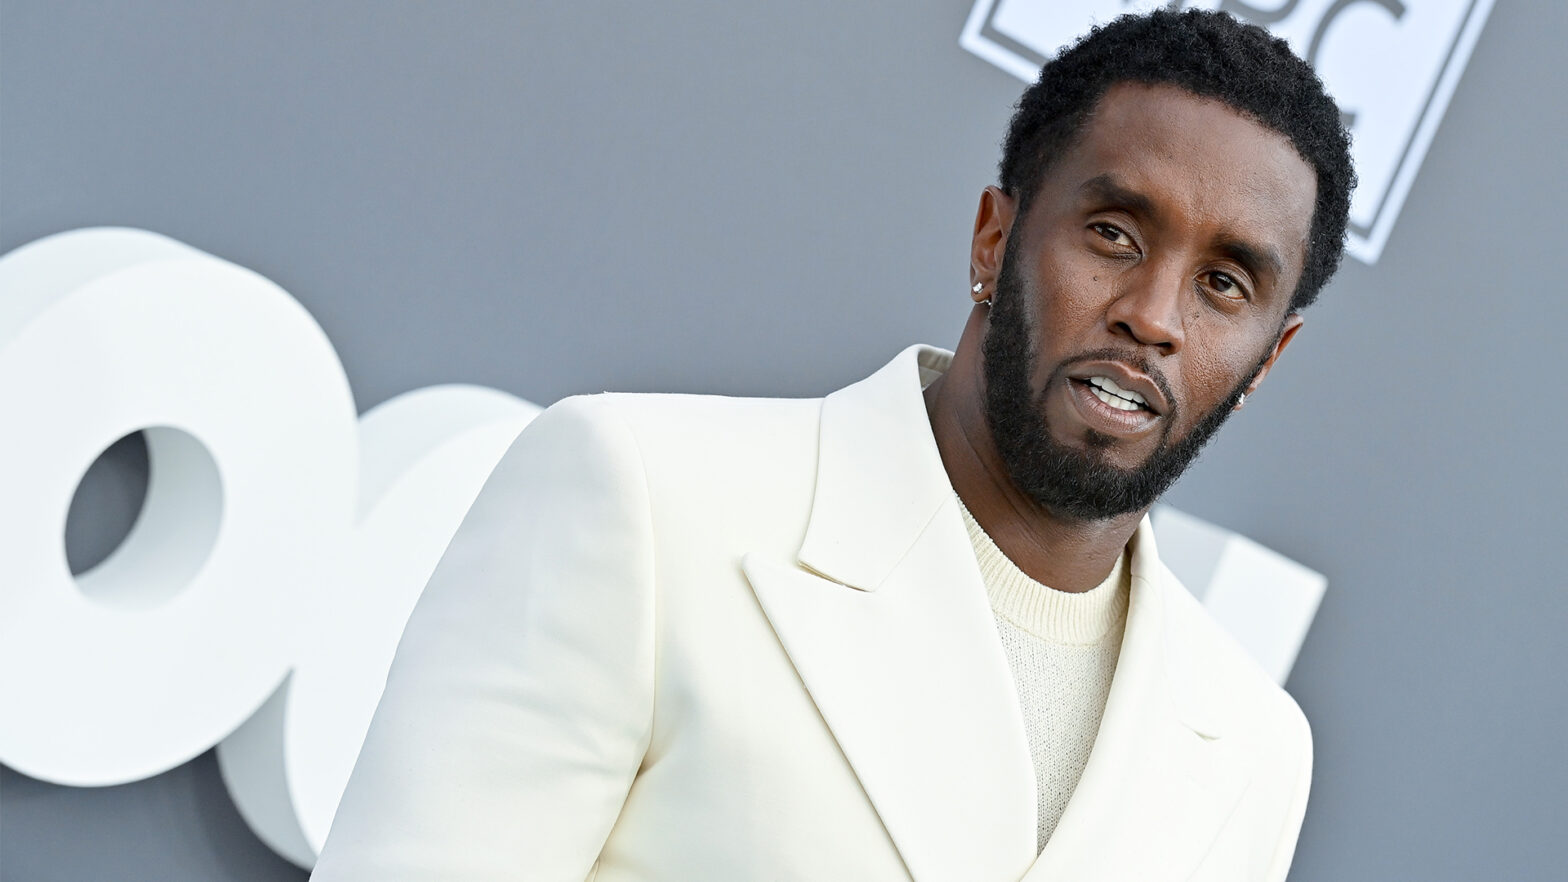 Diageo Looks To Drop Sean ‘Diddy’ Combs Following His Claims Of Alleged Racial Discrimination